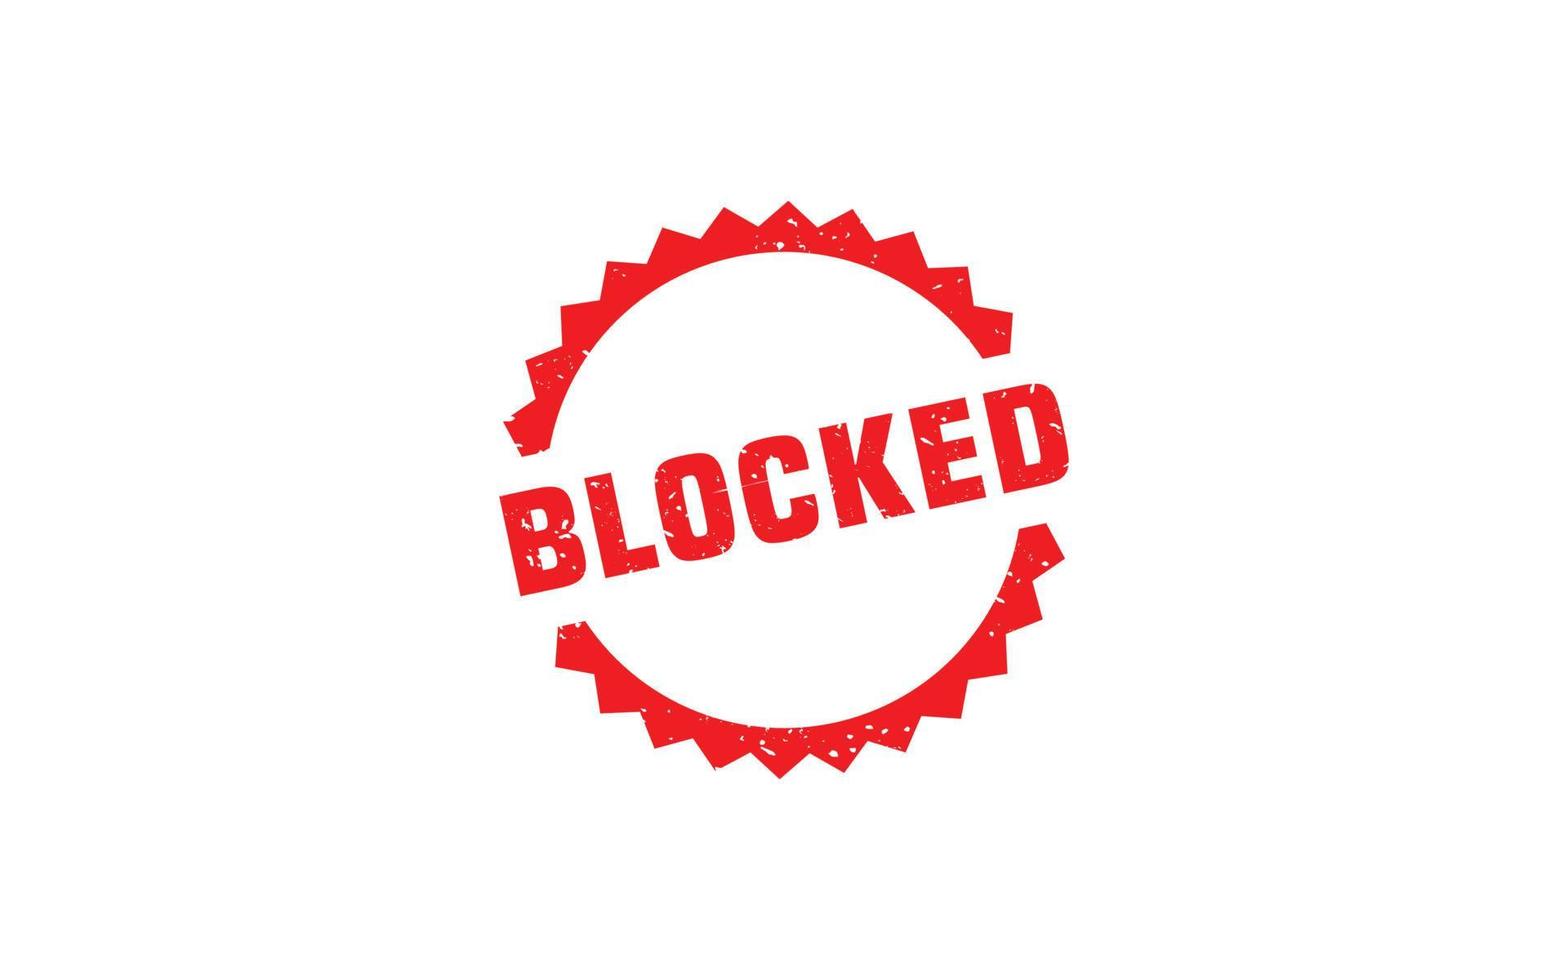 BLOCKED rubber stamp with grunge style on white background vector